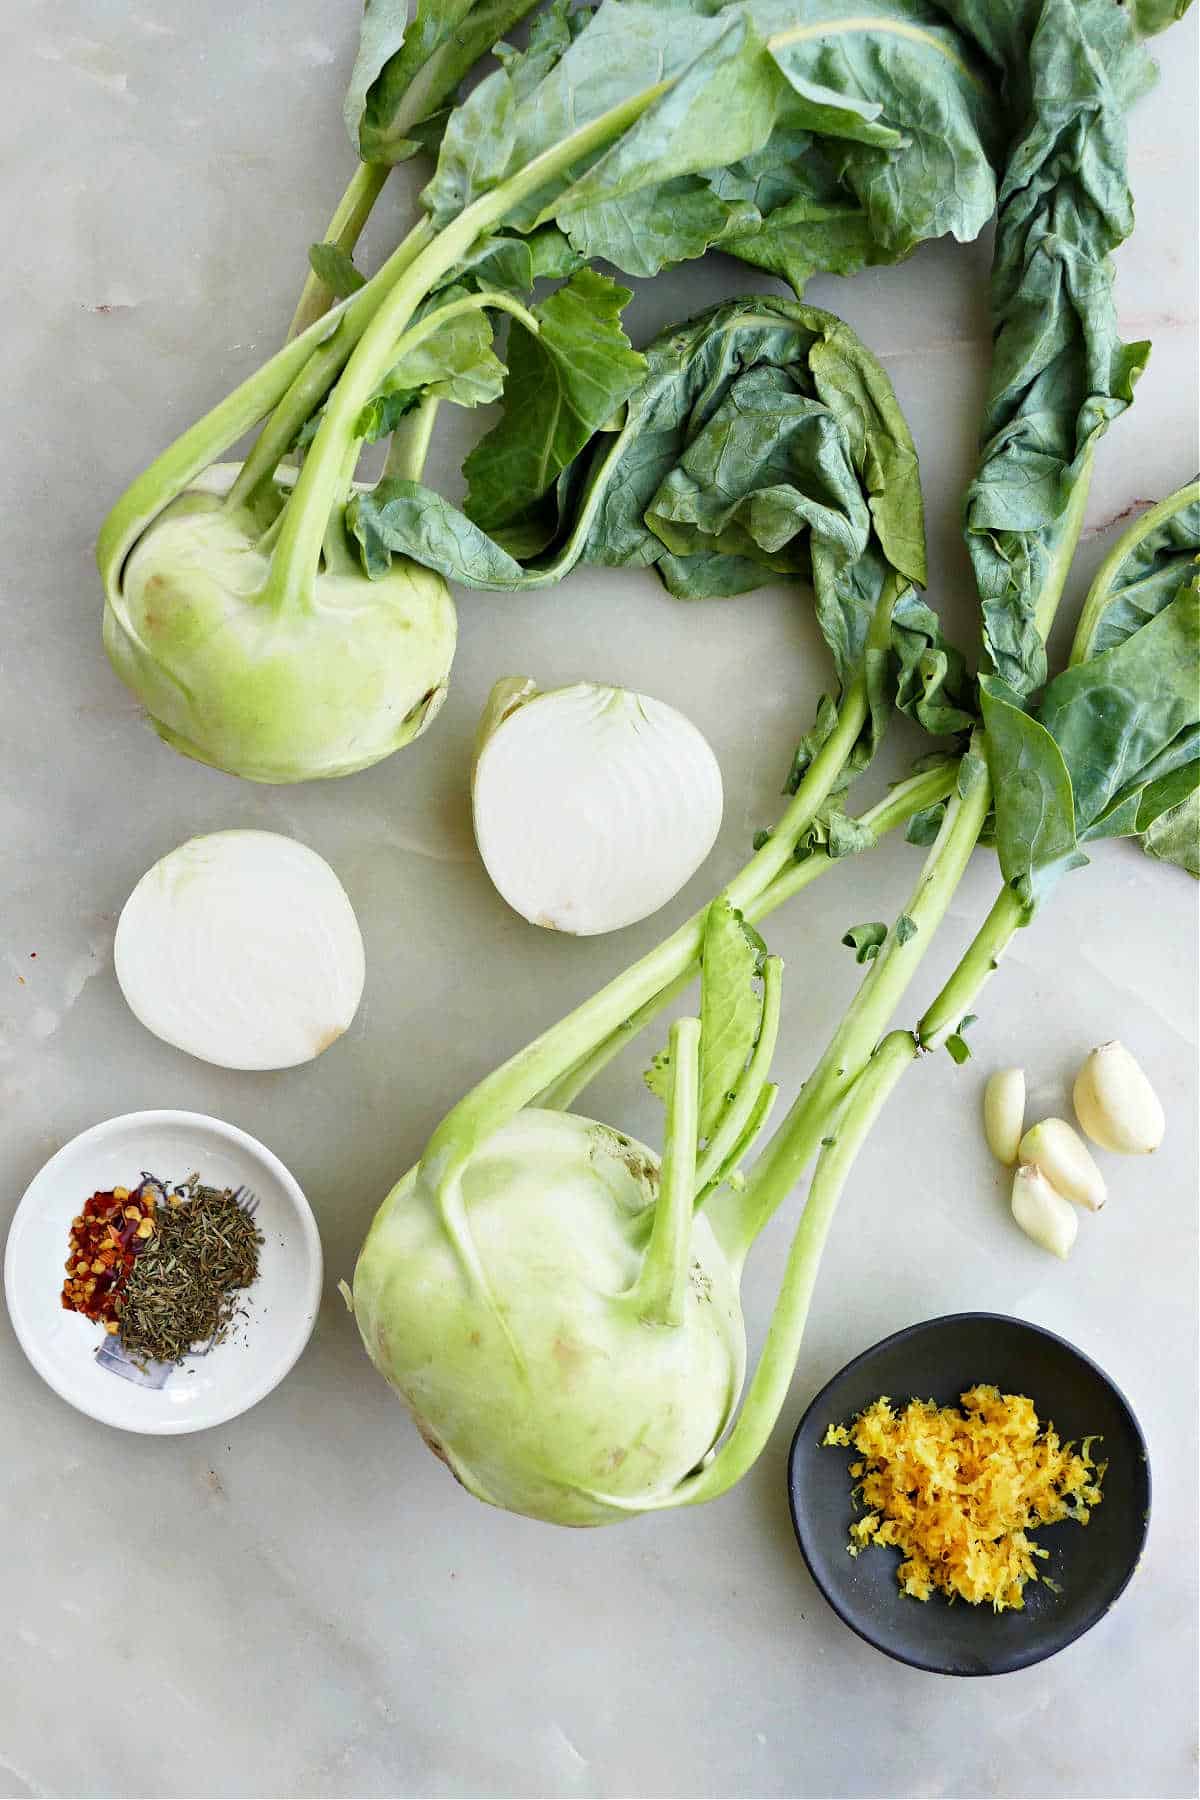 two kohlrabi bulbs with leaves, onion, garlic, lemon zest, and spices on a counter